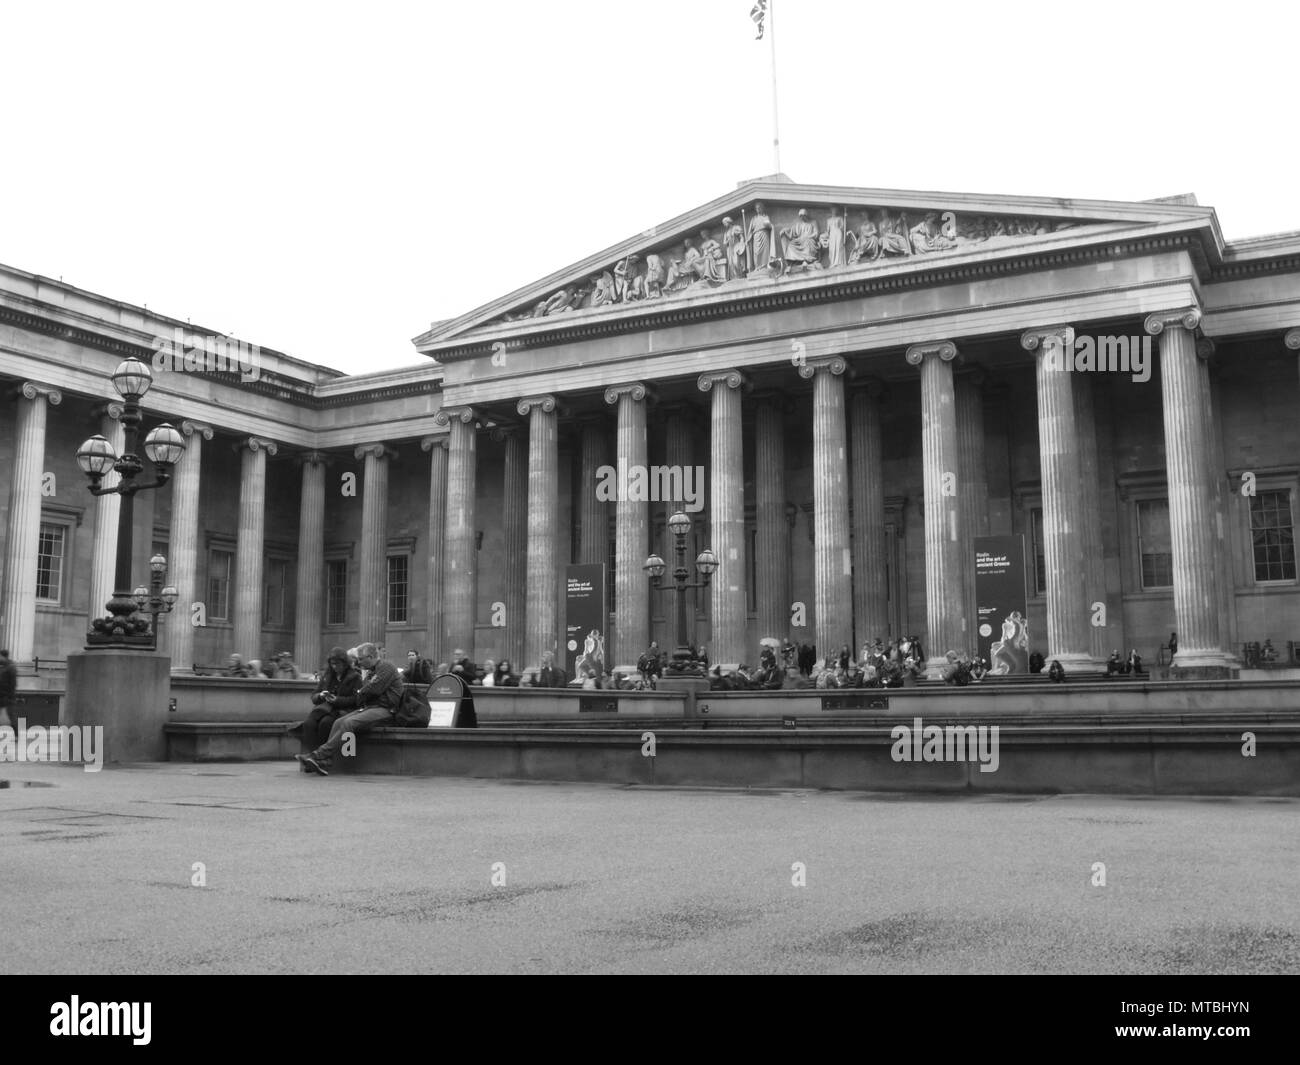 British Museum, Great Russell Street, Londres, Angleterre Banque D'Images